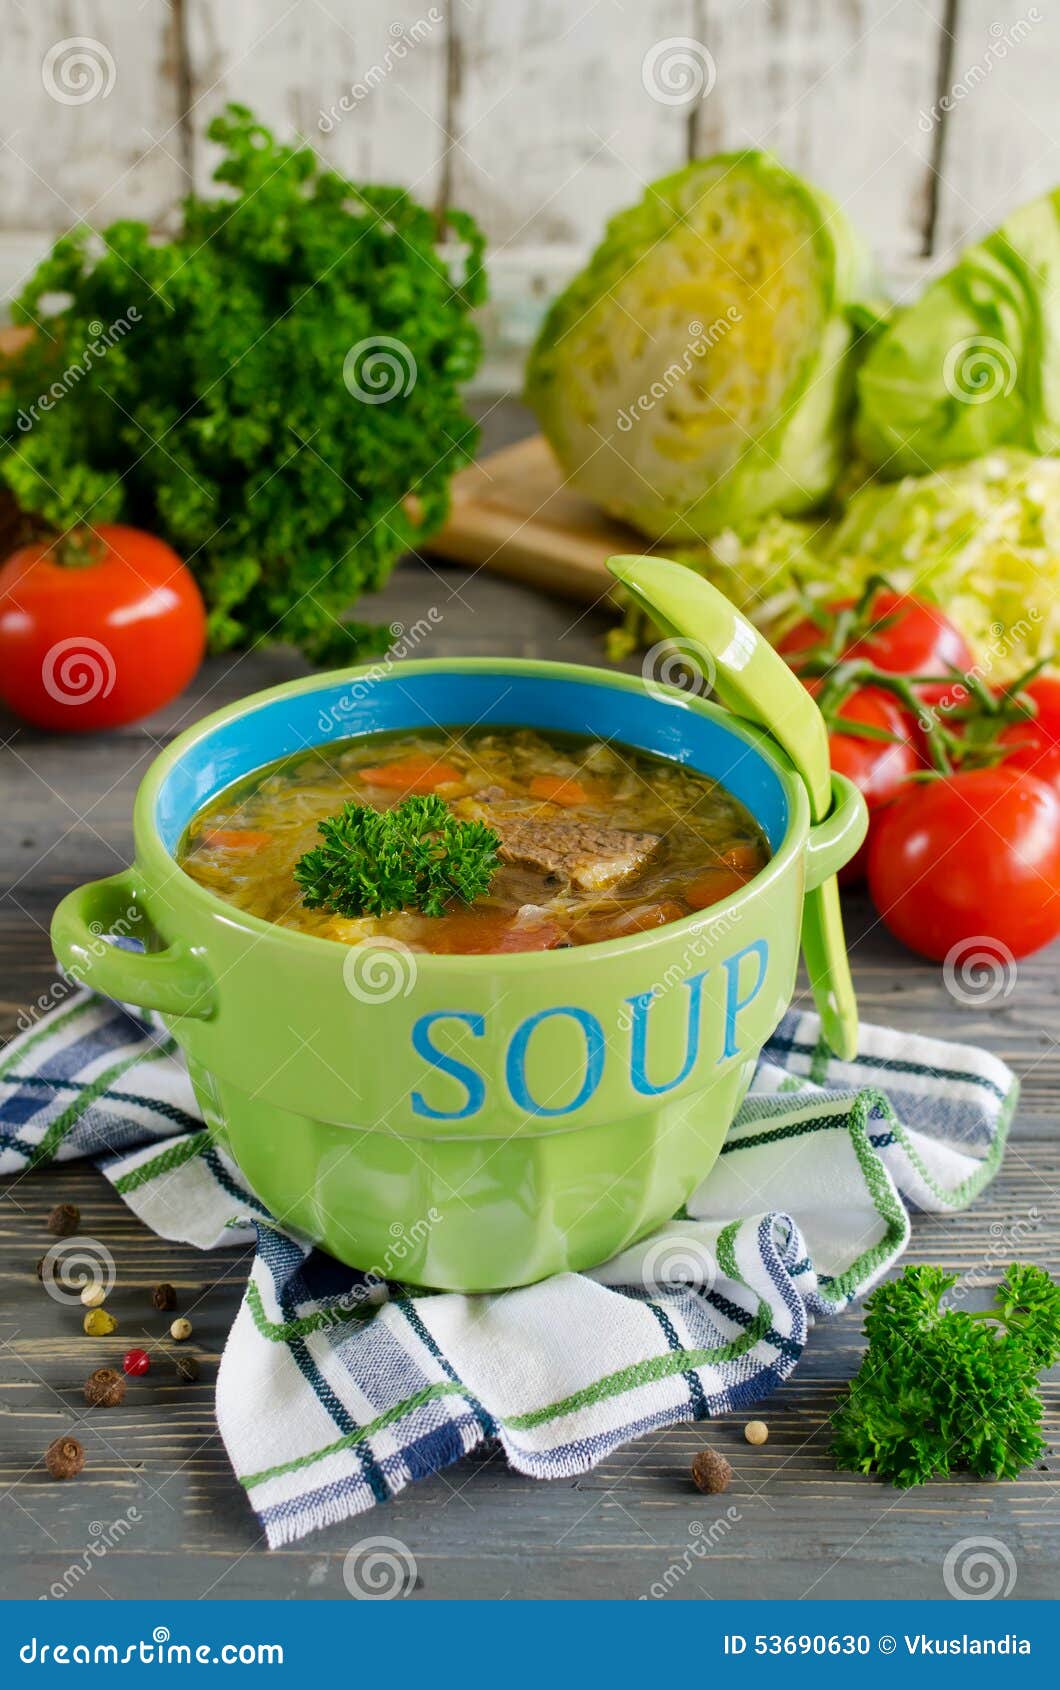 Shchi - Traditional Russian Cabbage Soup on a Wooden Table Stock Photo ...